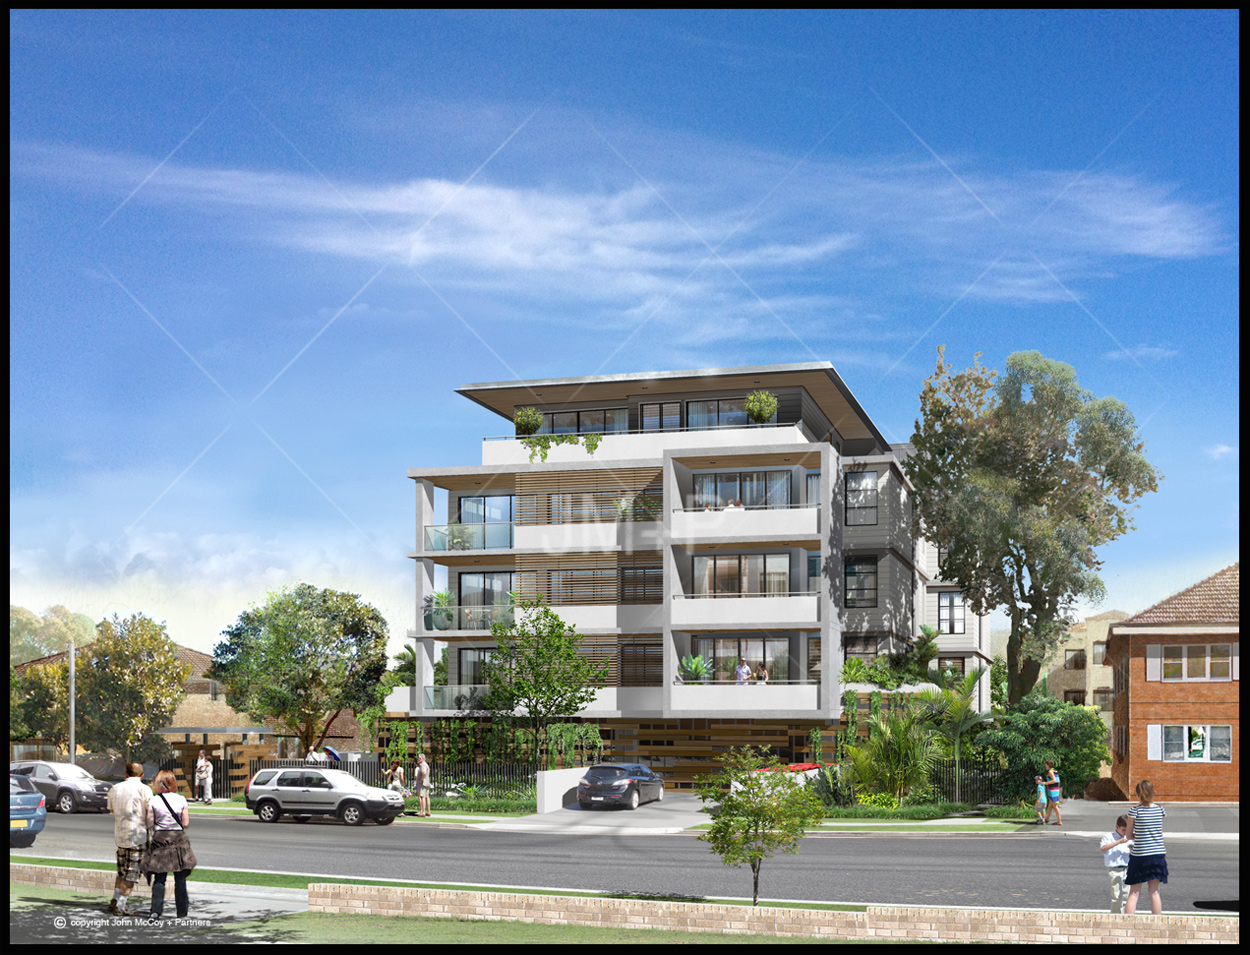 artist impression, exterior view of residential apartments